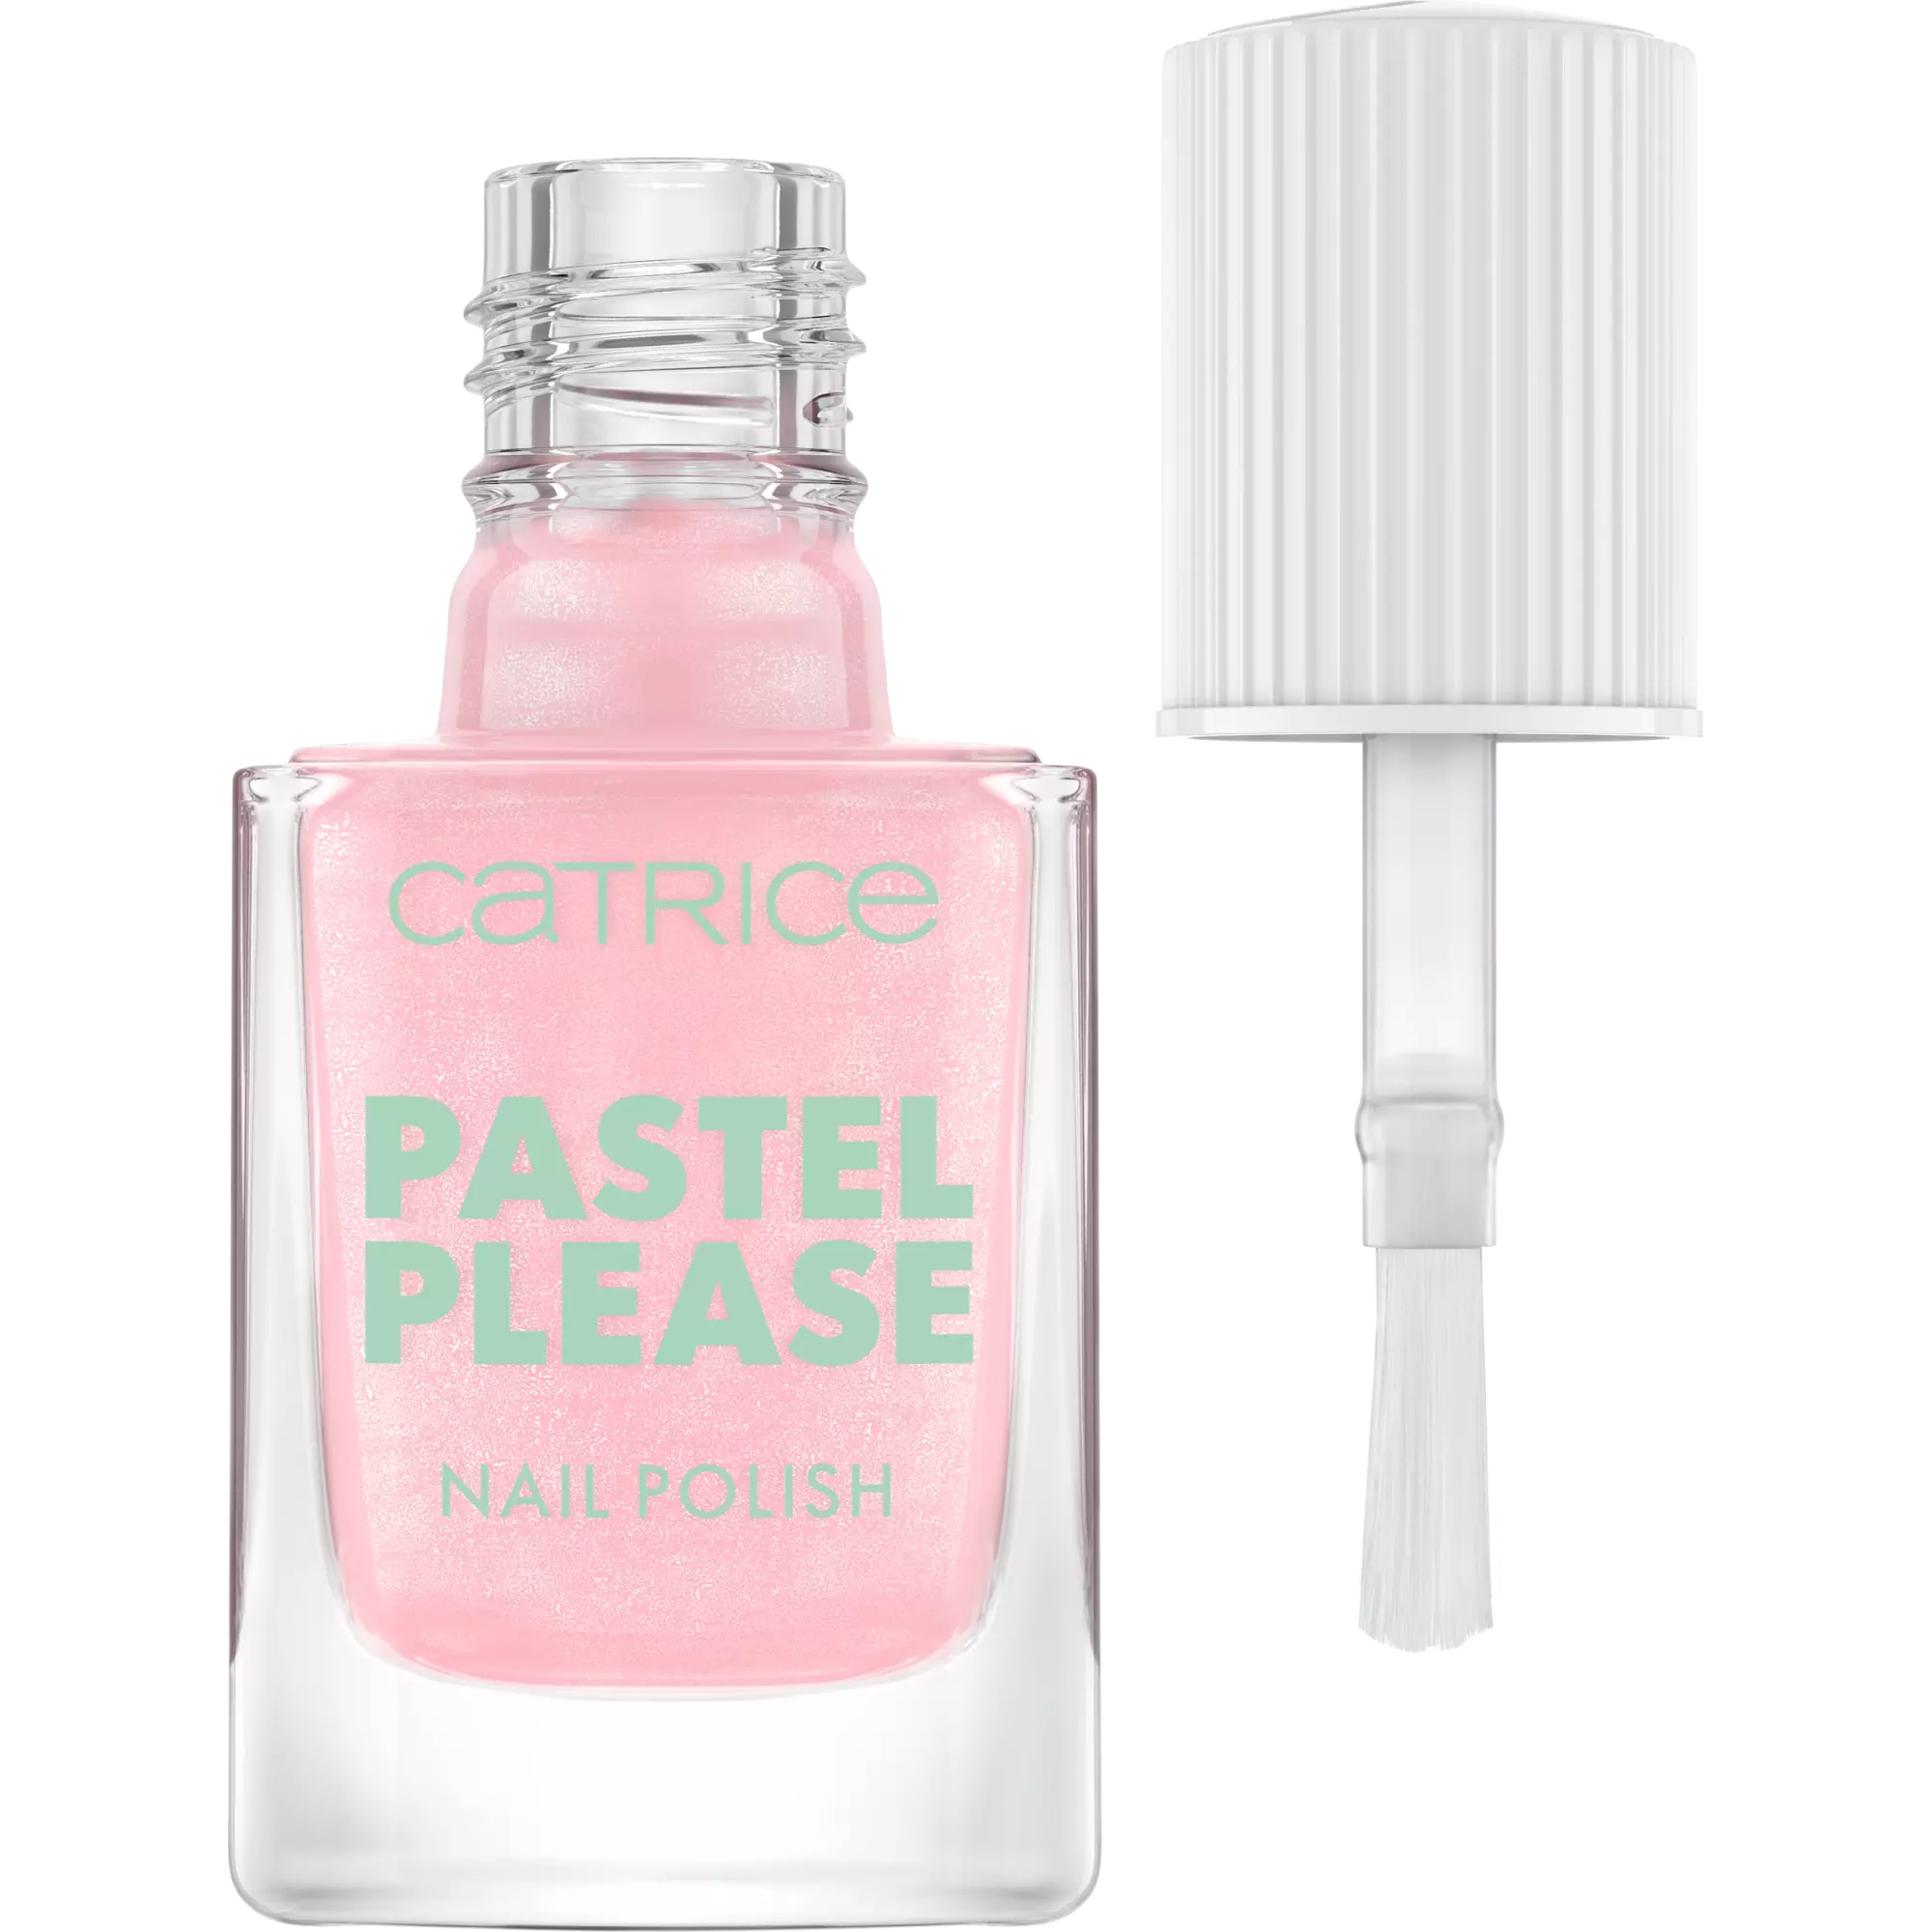 Catrice Pastel Please Nail Polish In Colour 010 Think Pink